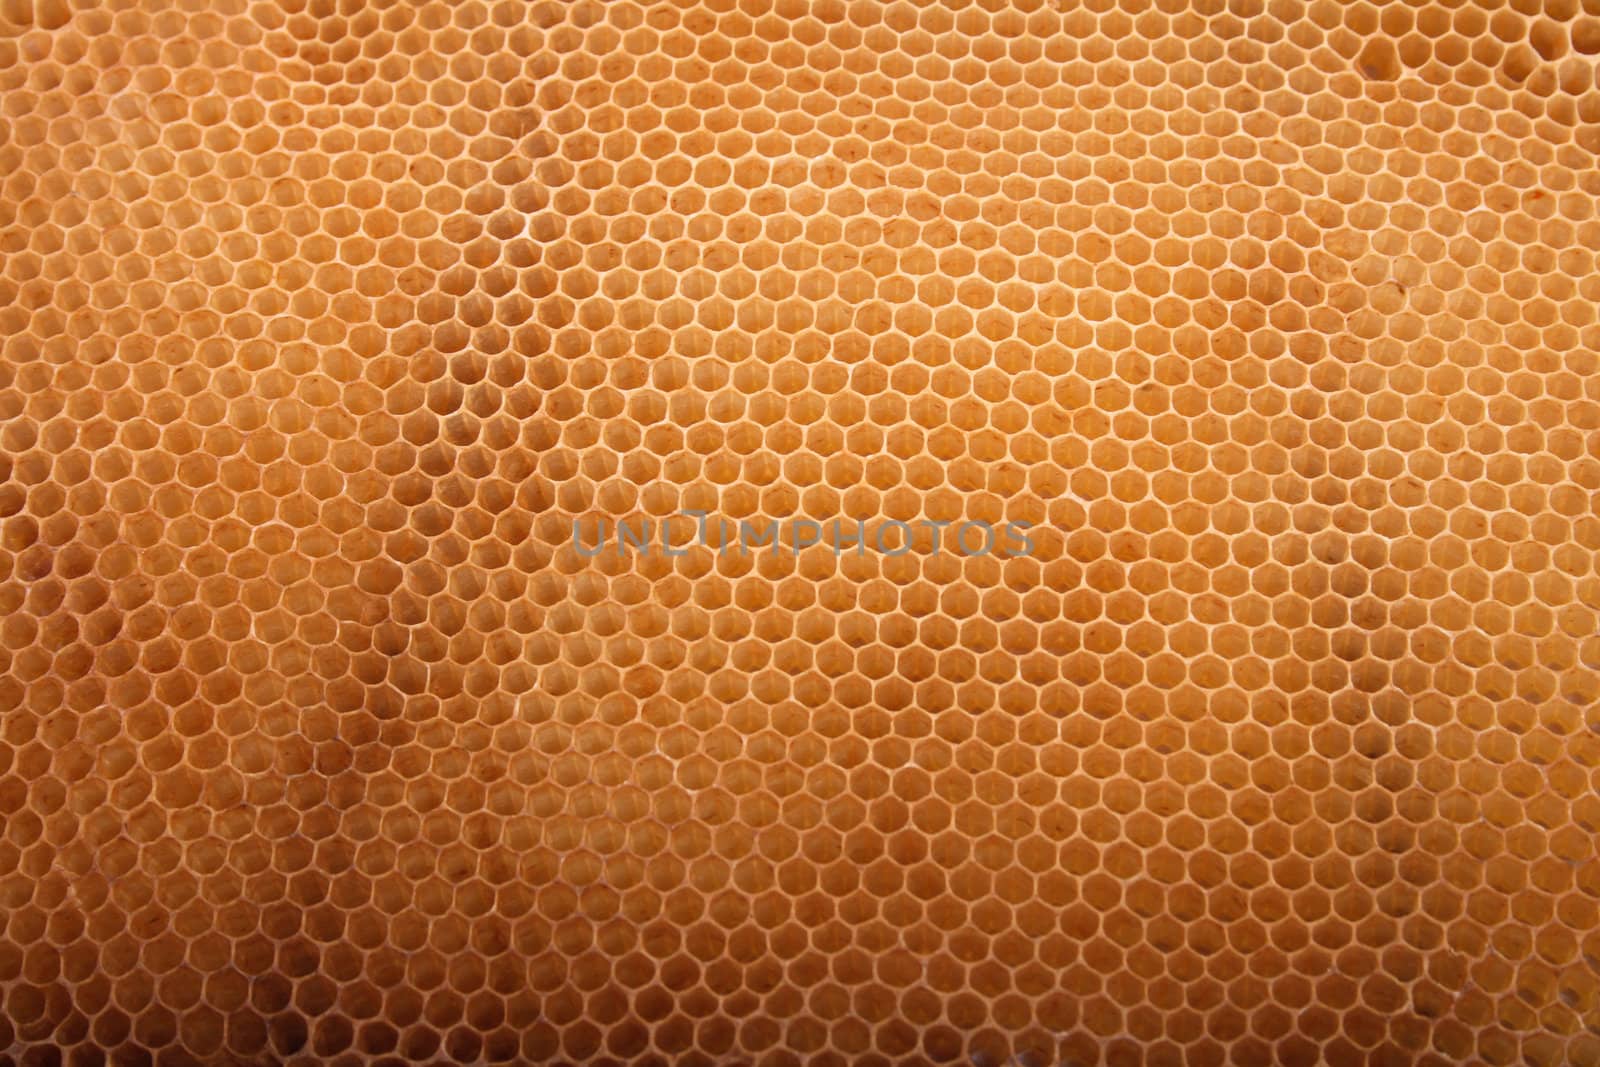 natural honey texture without honey (abstract background)